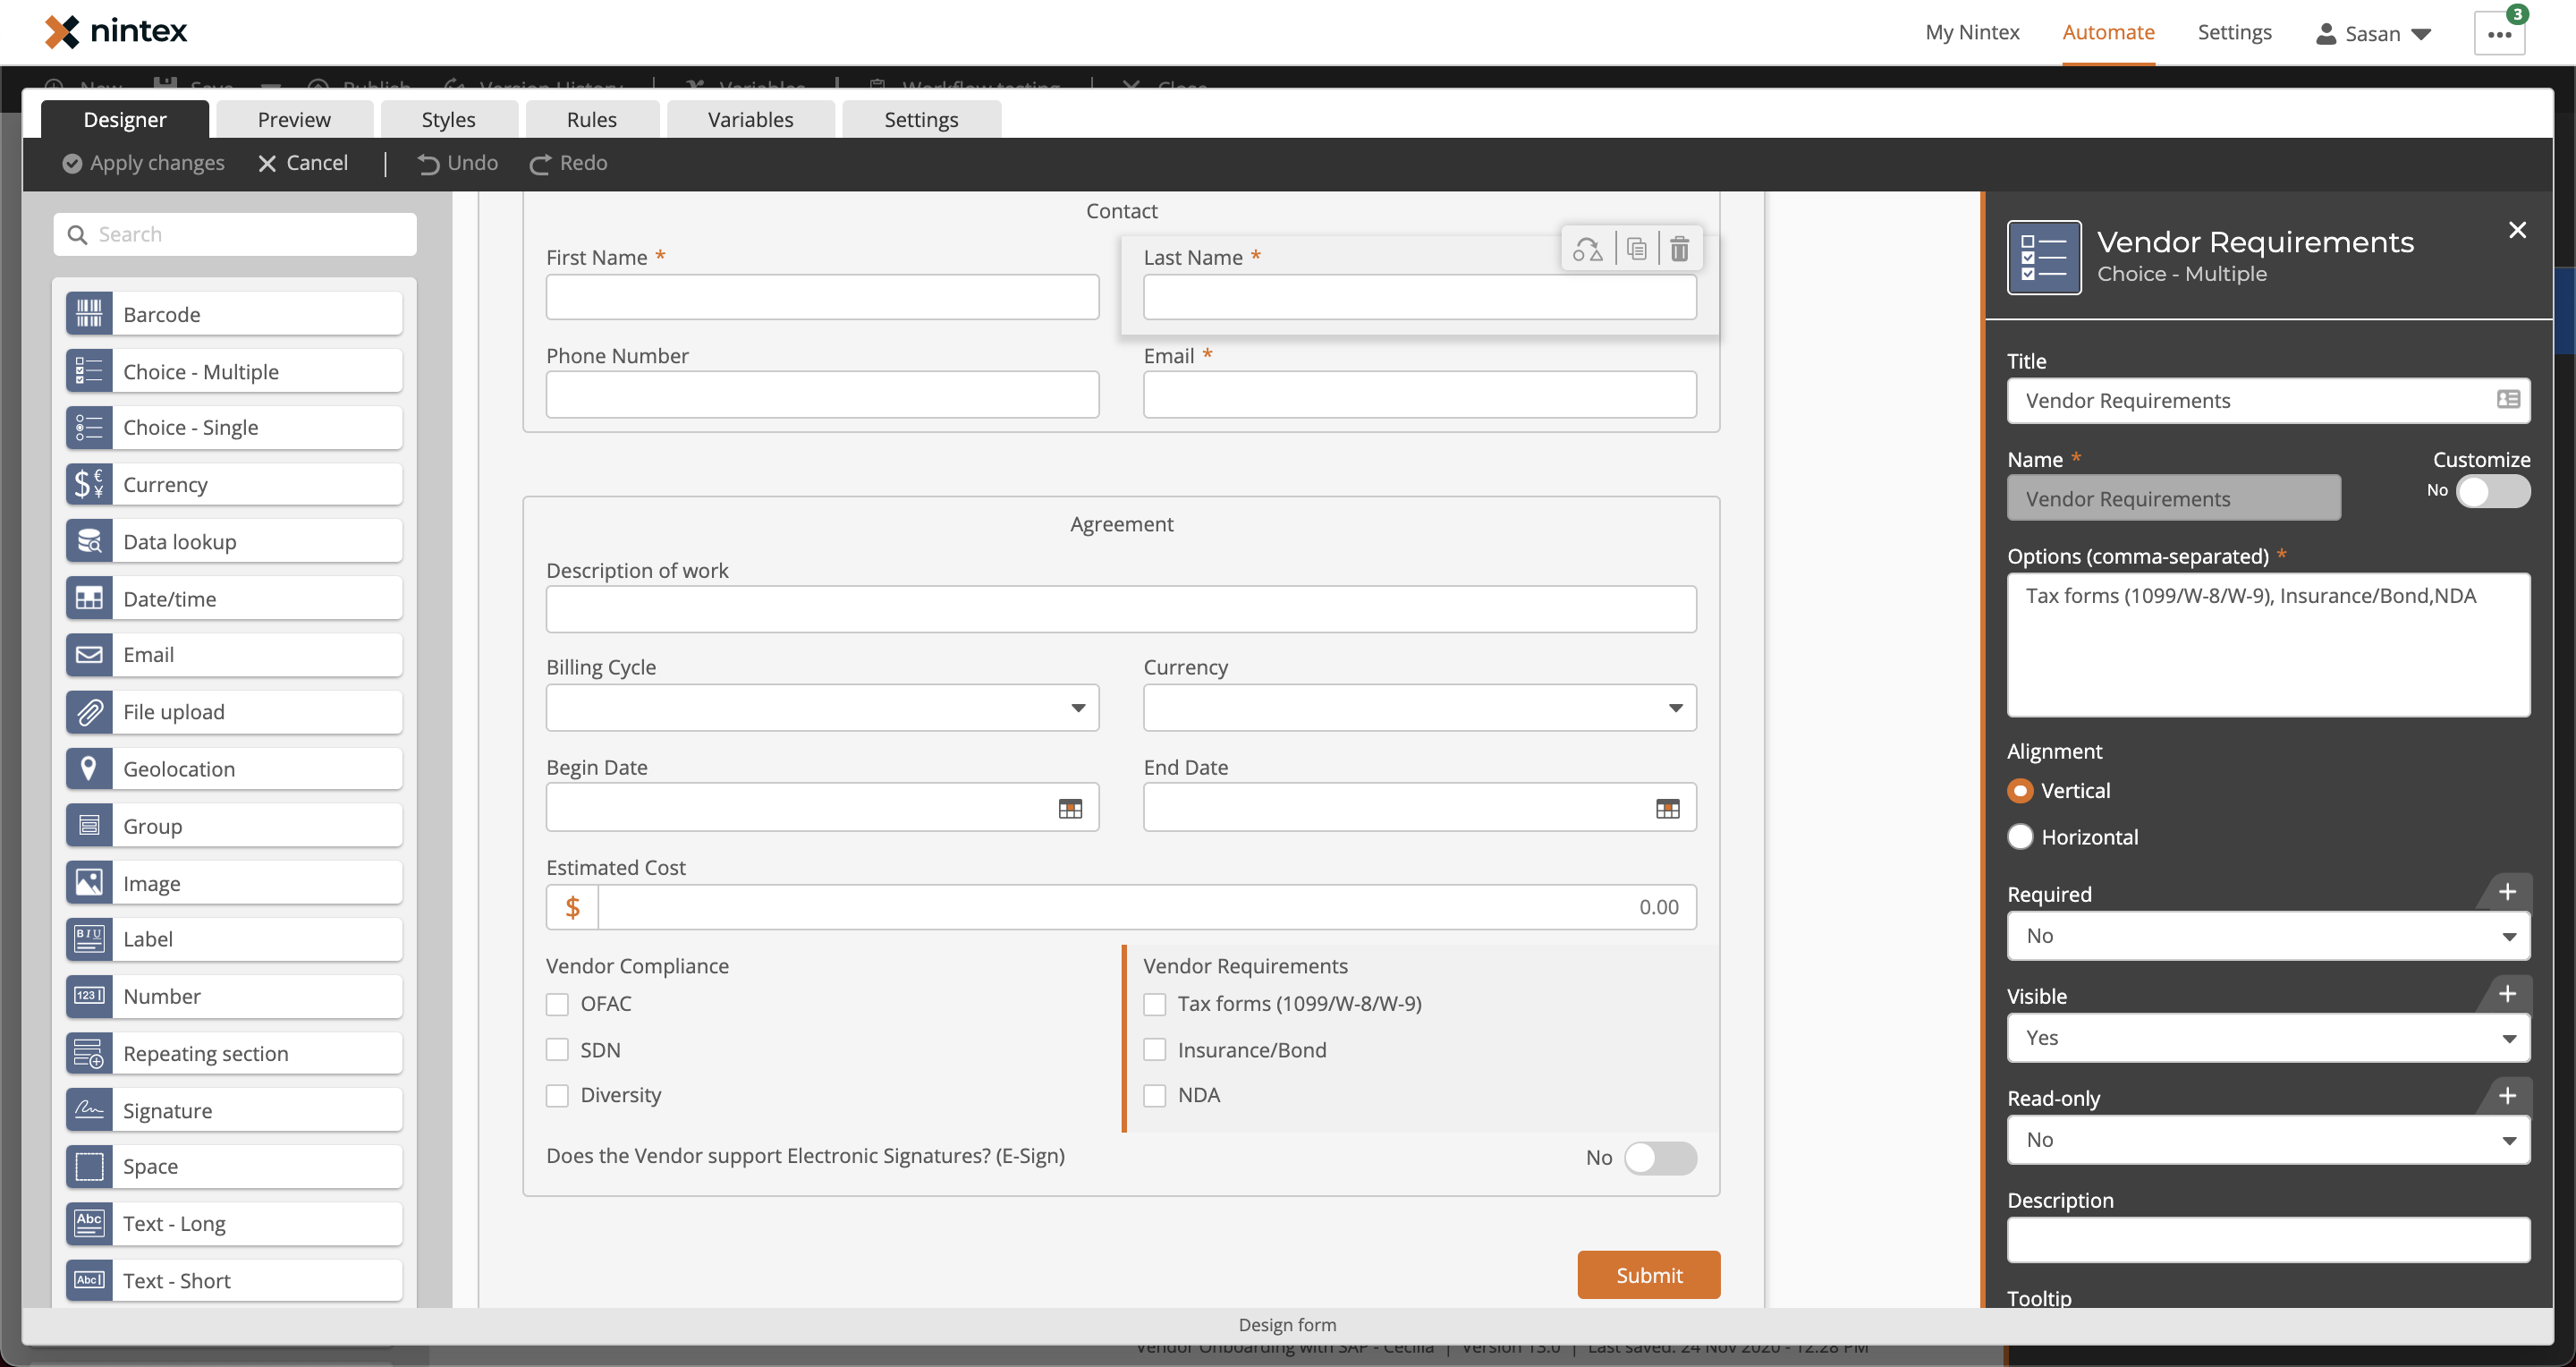 Picture of nintex website form for basic info